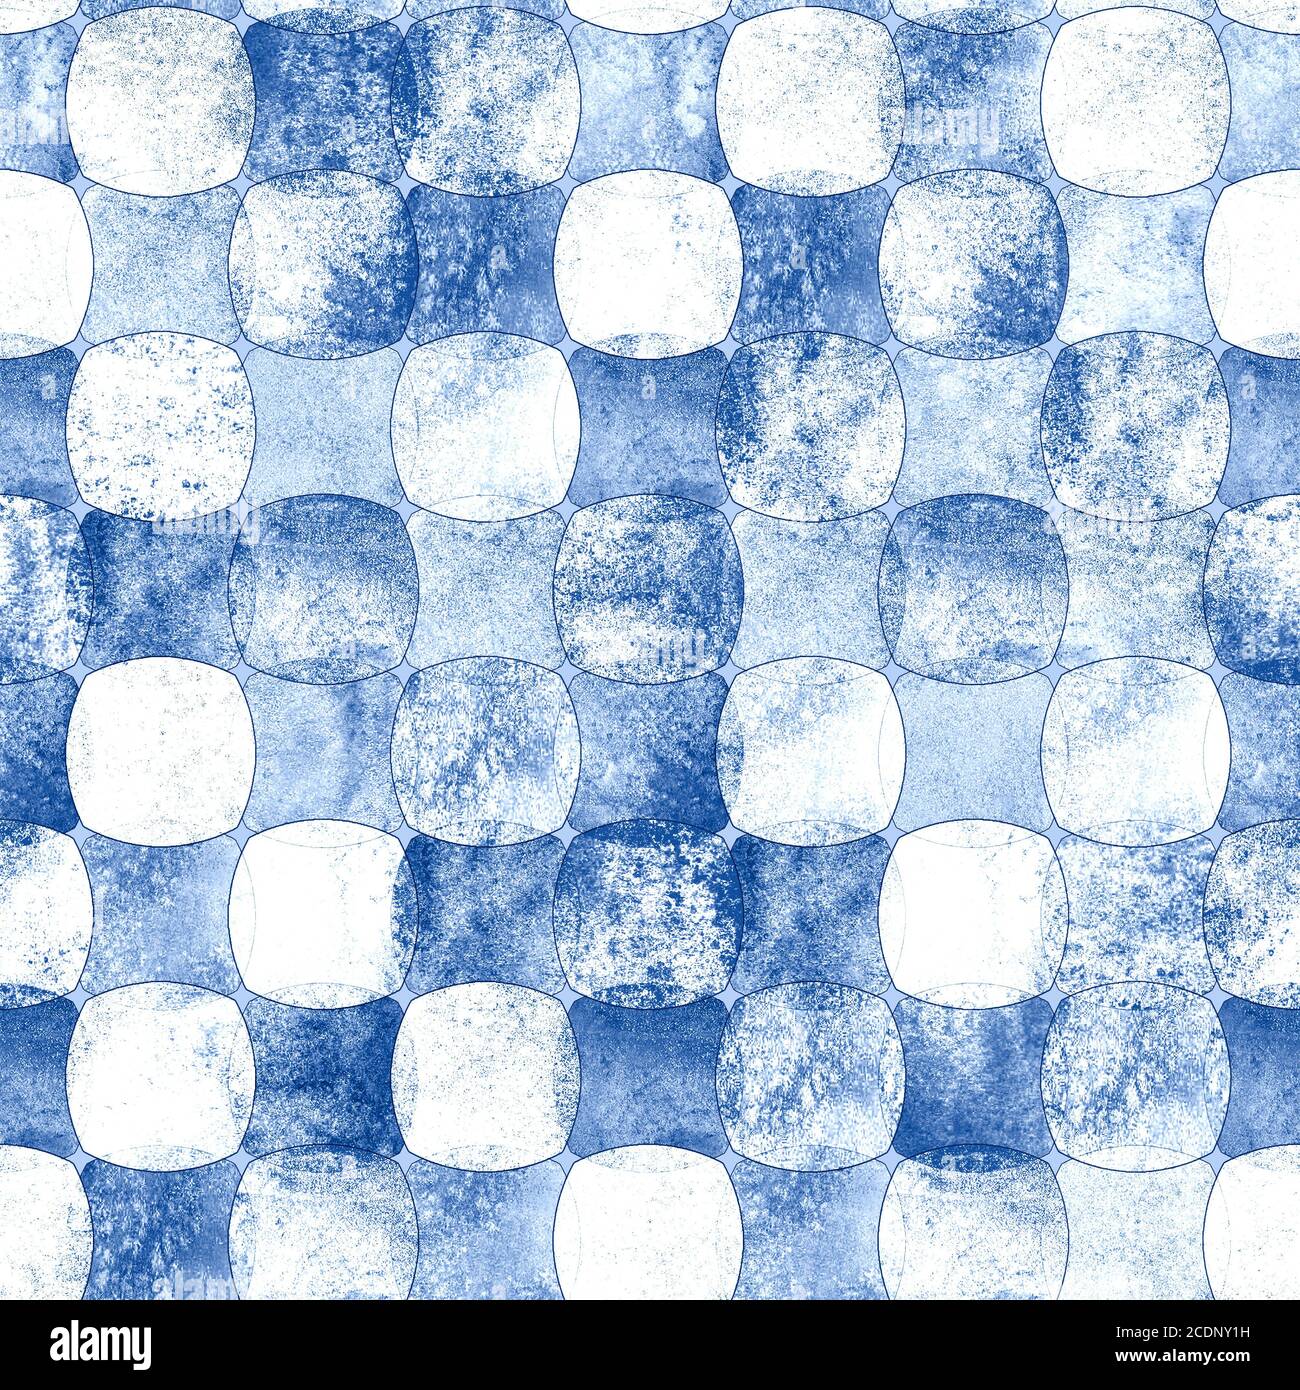 Seamless geometric pattern with grunge polka dot monochrome indigo blue navy watercolor abstract overlapping shapes checkered background. Watercolour Stock Photo